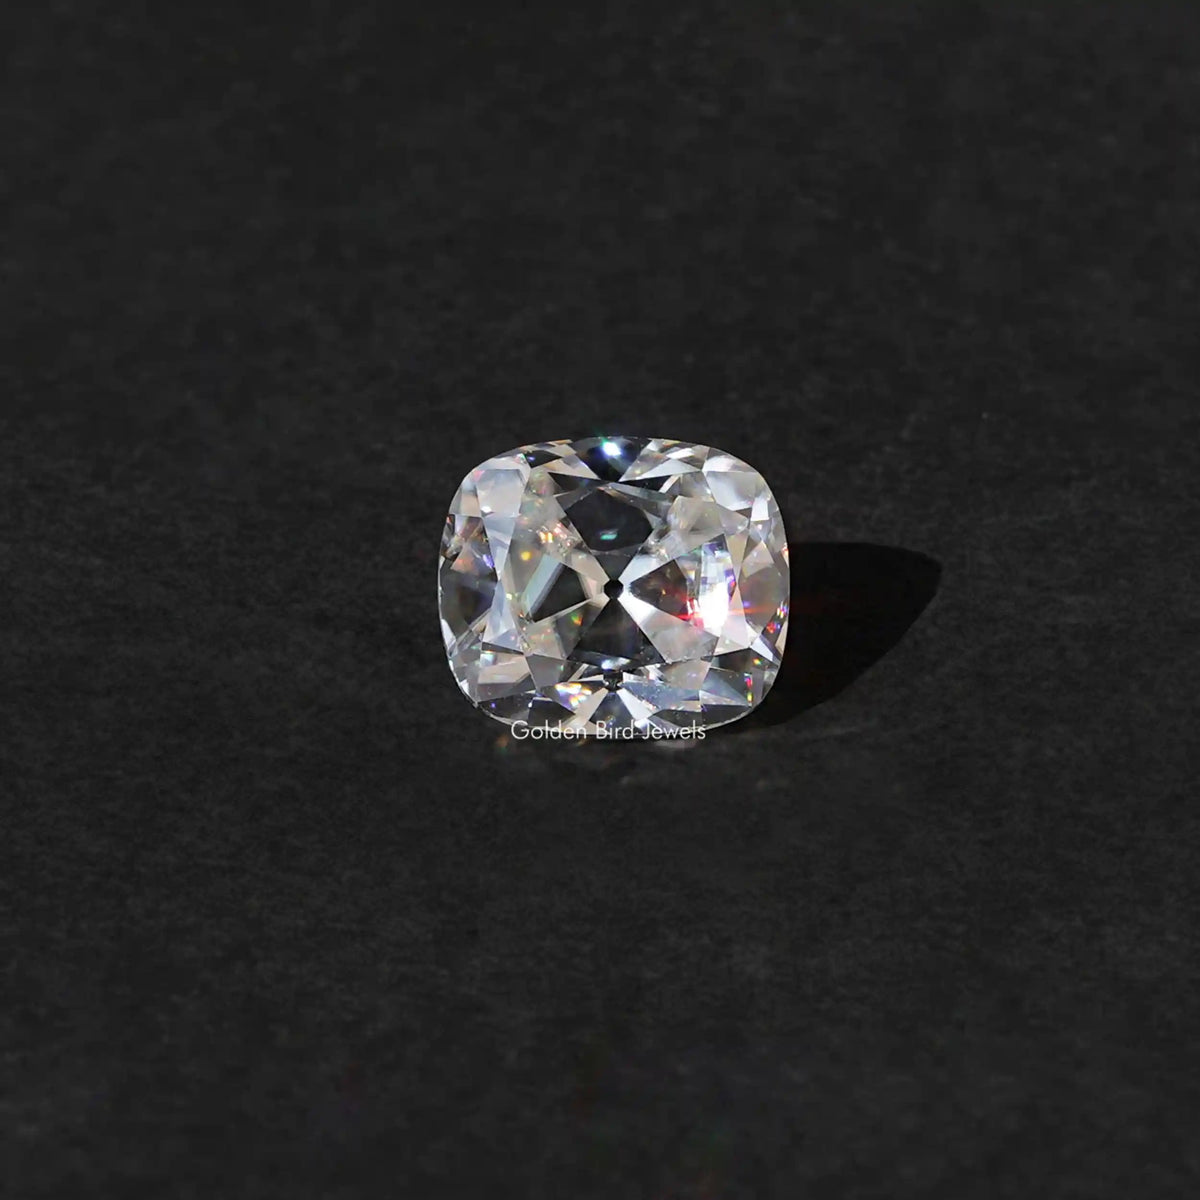 [Front view of old mine cushion cut loose stone]-[Golden Bird Jewels]